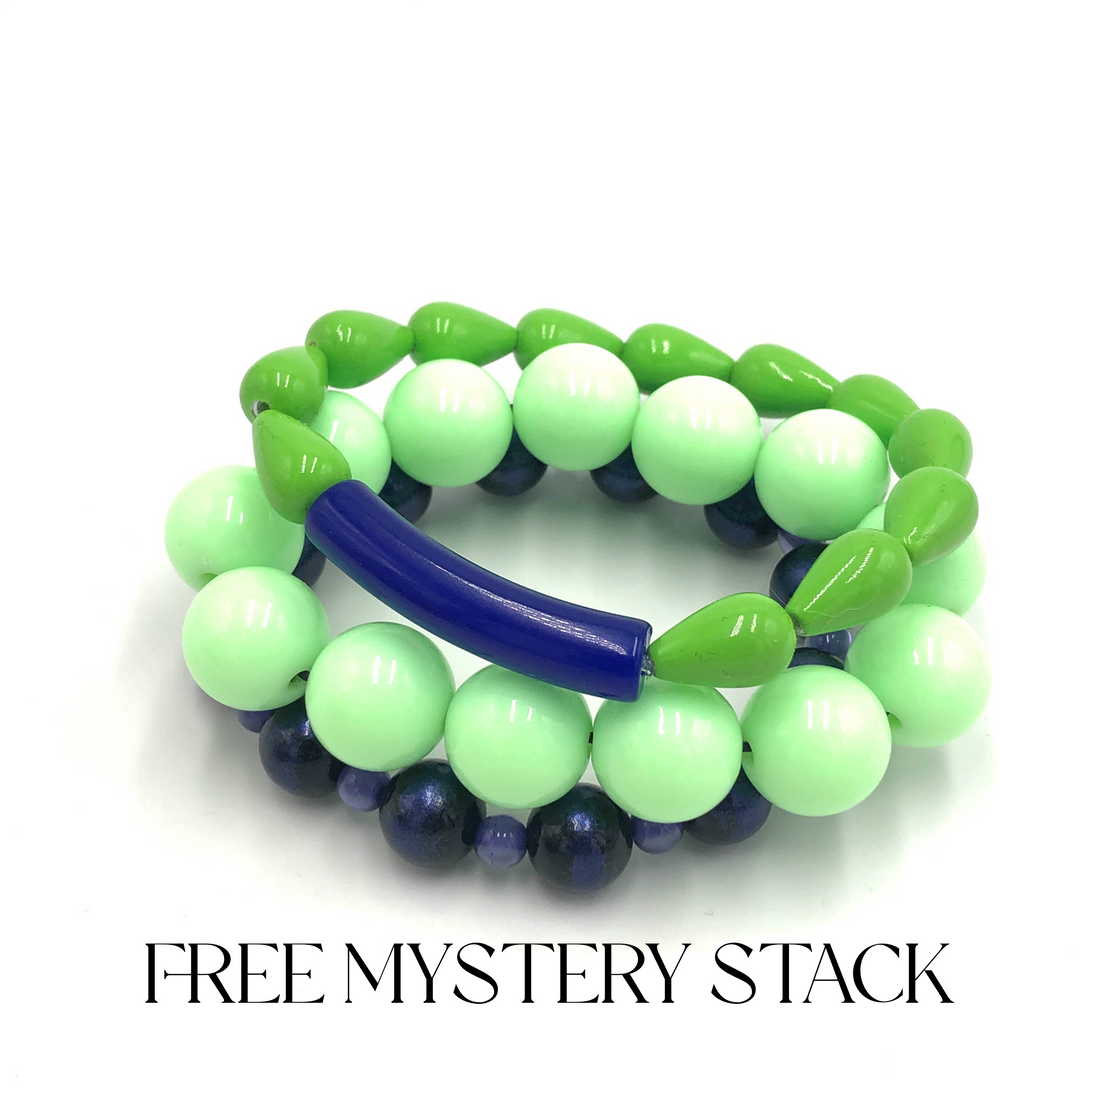 FREE Mystery Stack of 3 with Every 3 items!